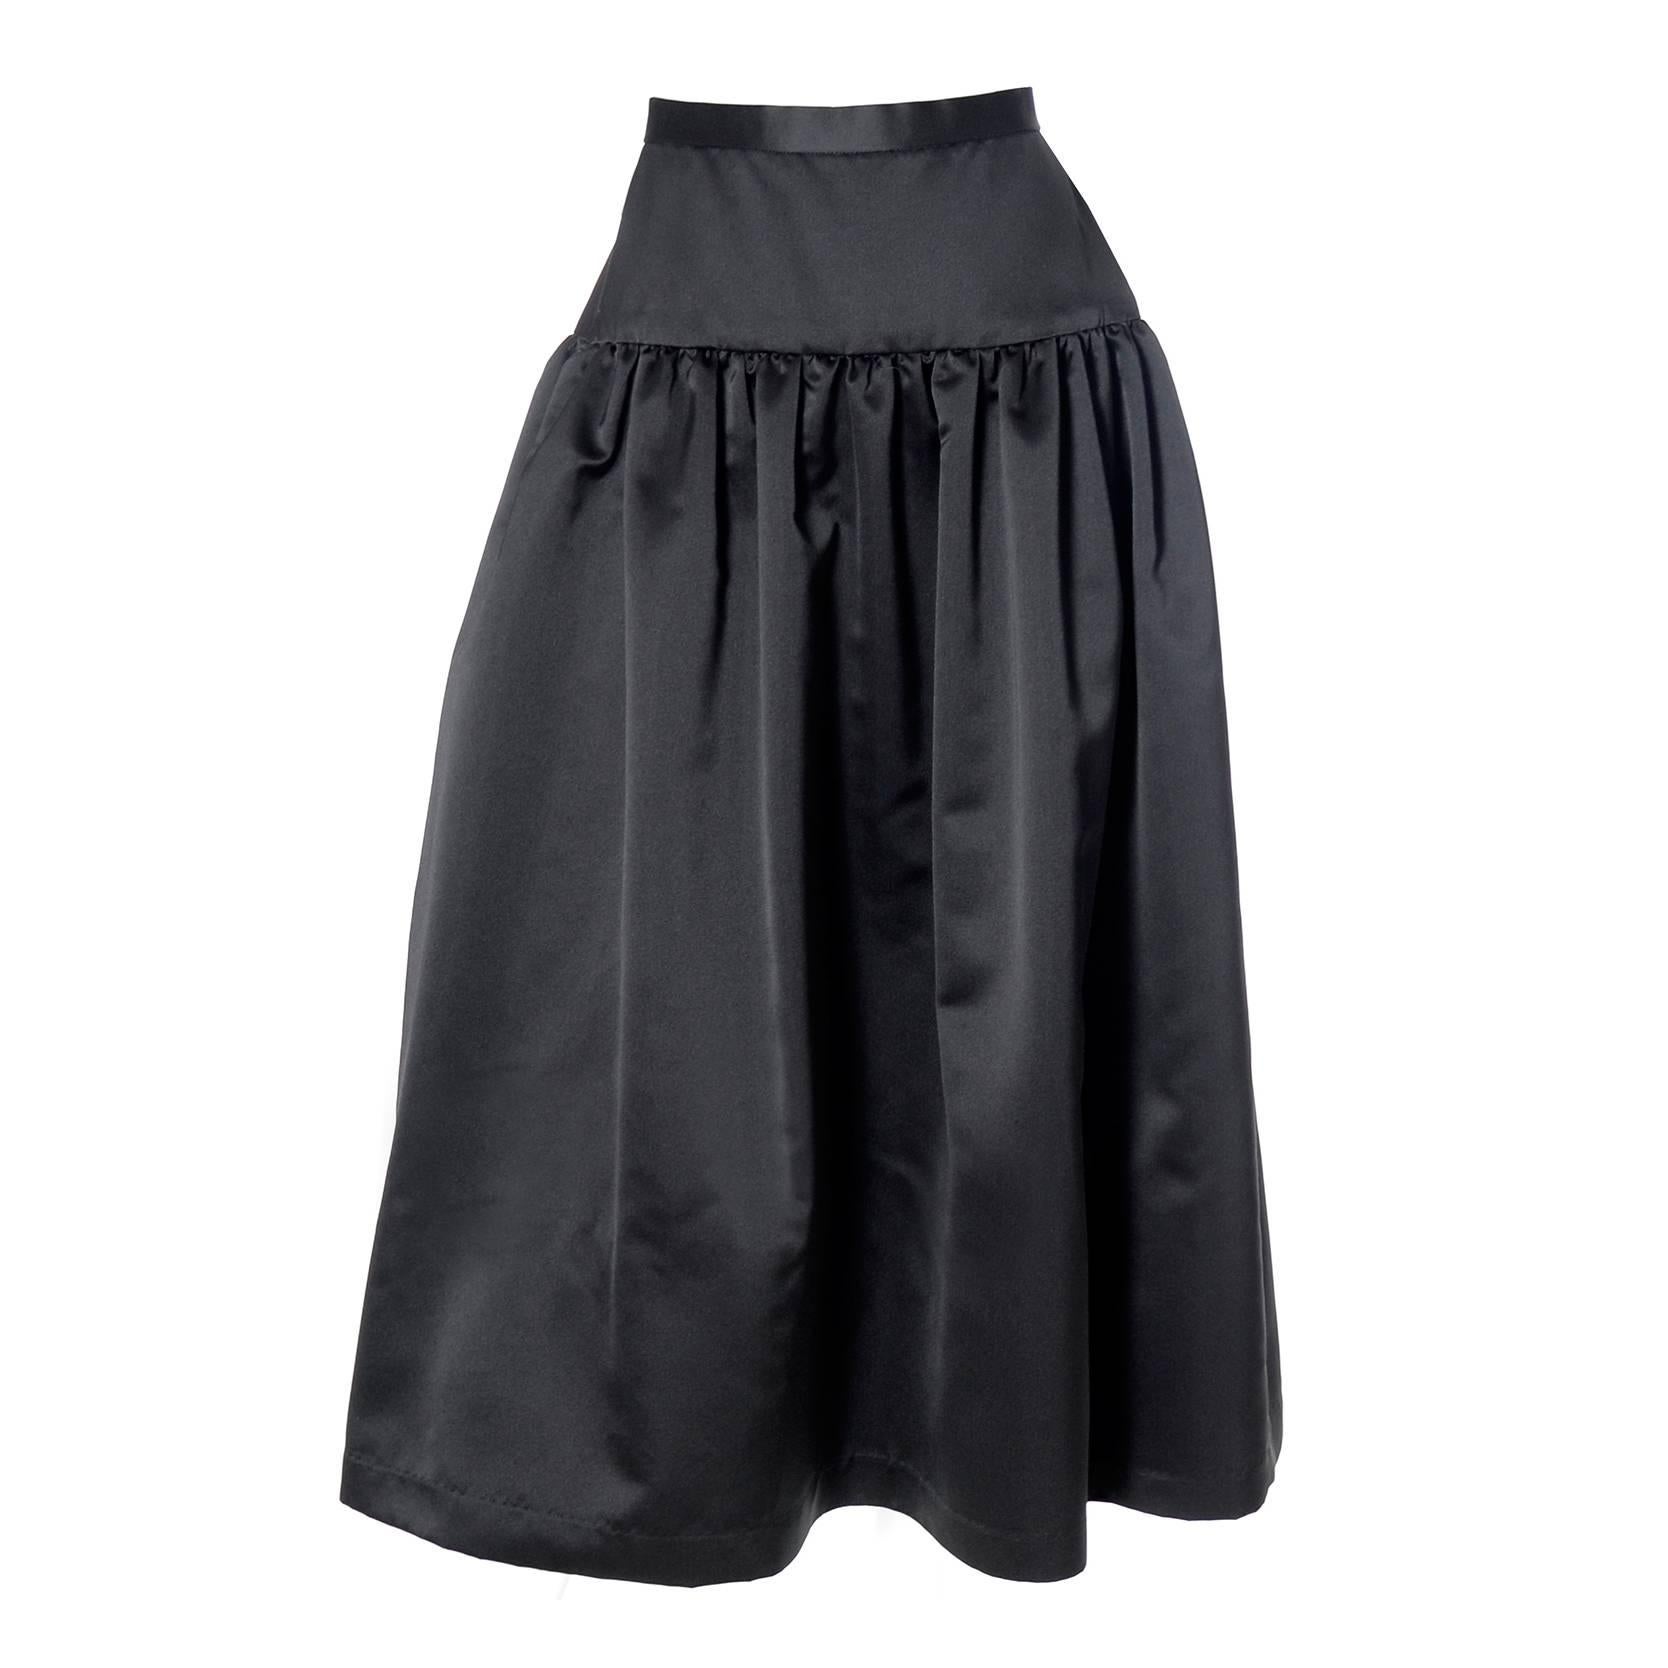 Anthony Muto For Moroci Black Satin Vintage Skirt Evening Size 10 For Sale